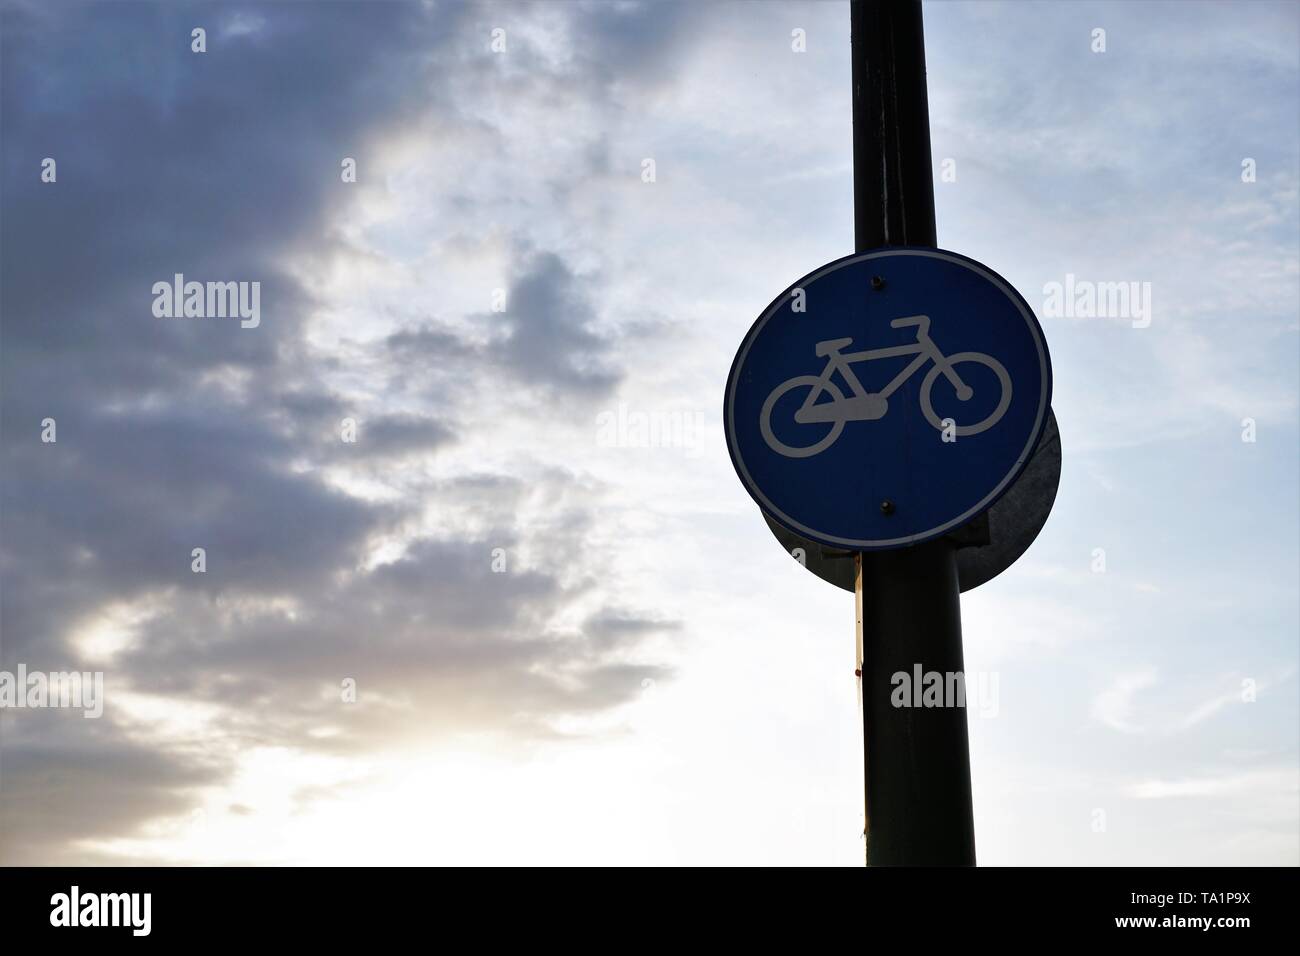 Bicycle line road sign with cloudy sky background. Stock Photo